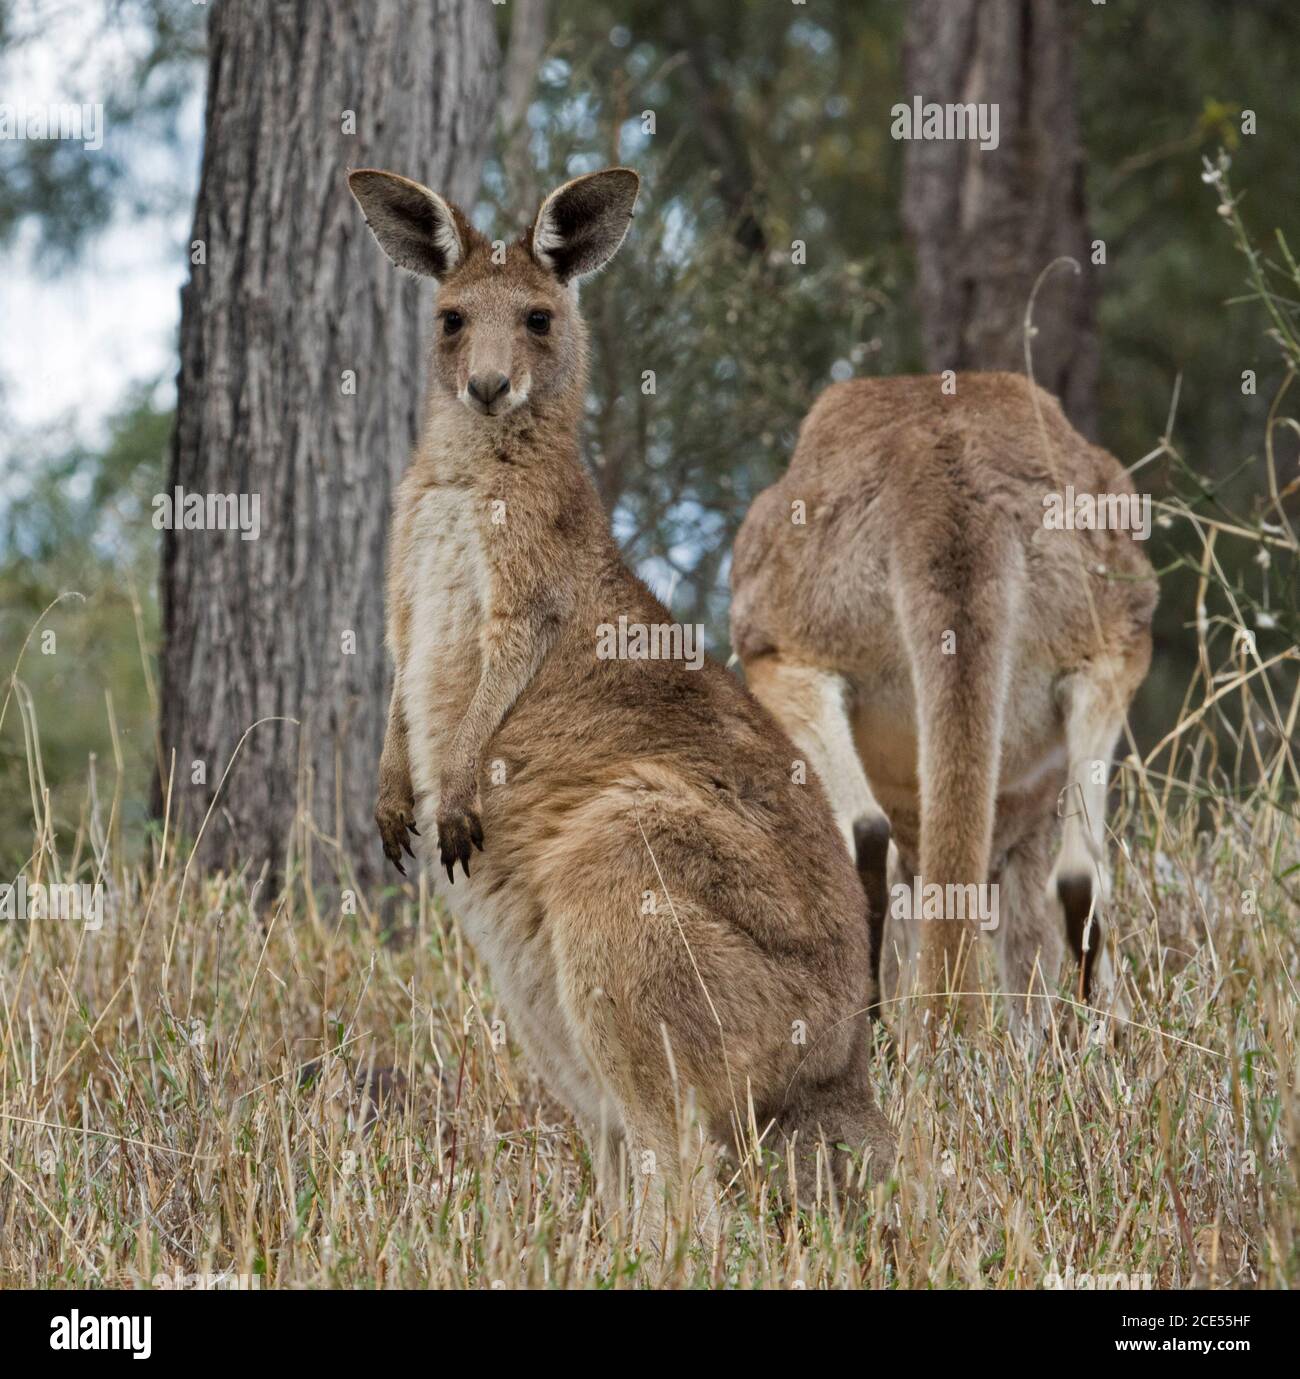 Beautiful Australian Eastern Grey kangaroo, large joey, alert and  staring at the camera, in the wild, with mother in background among grasses & trees Stock Photo